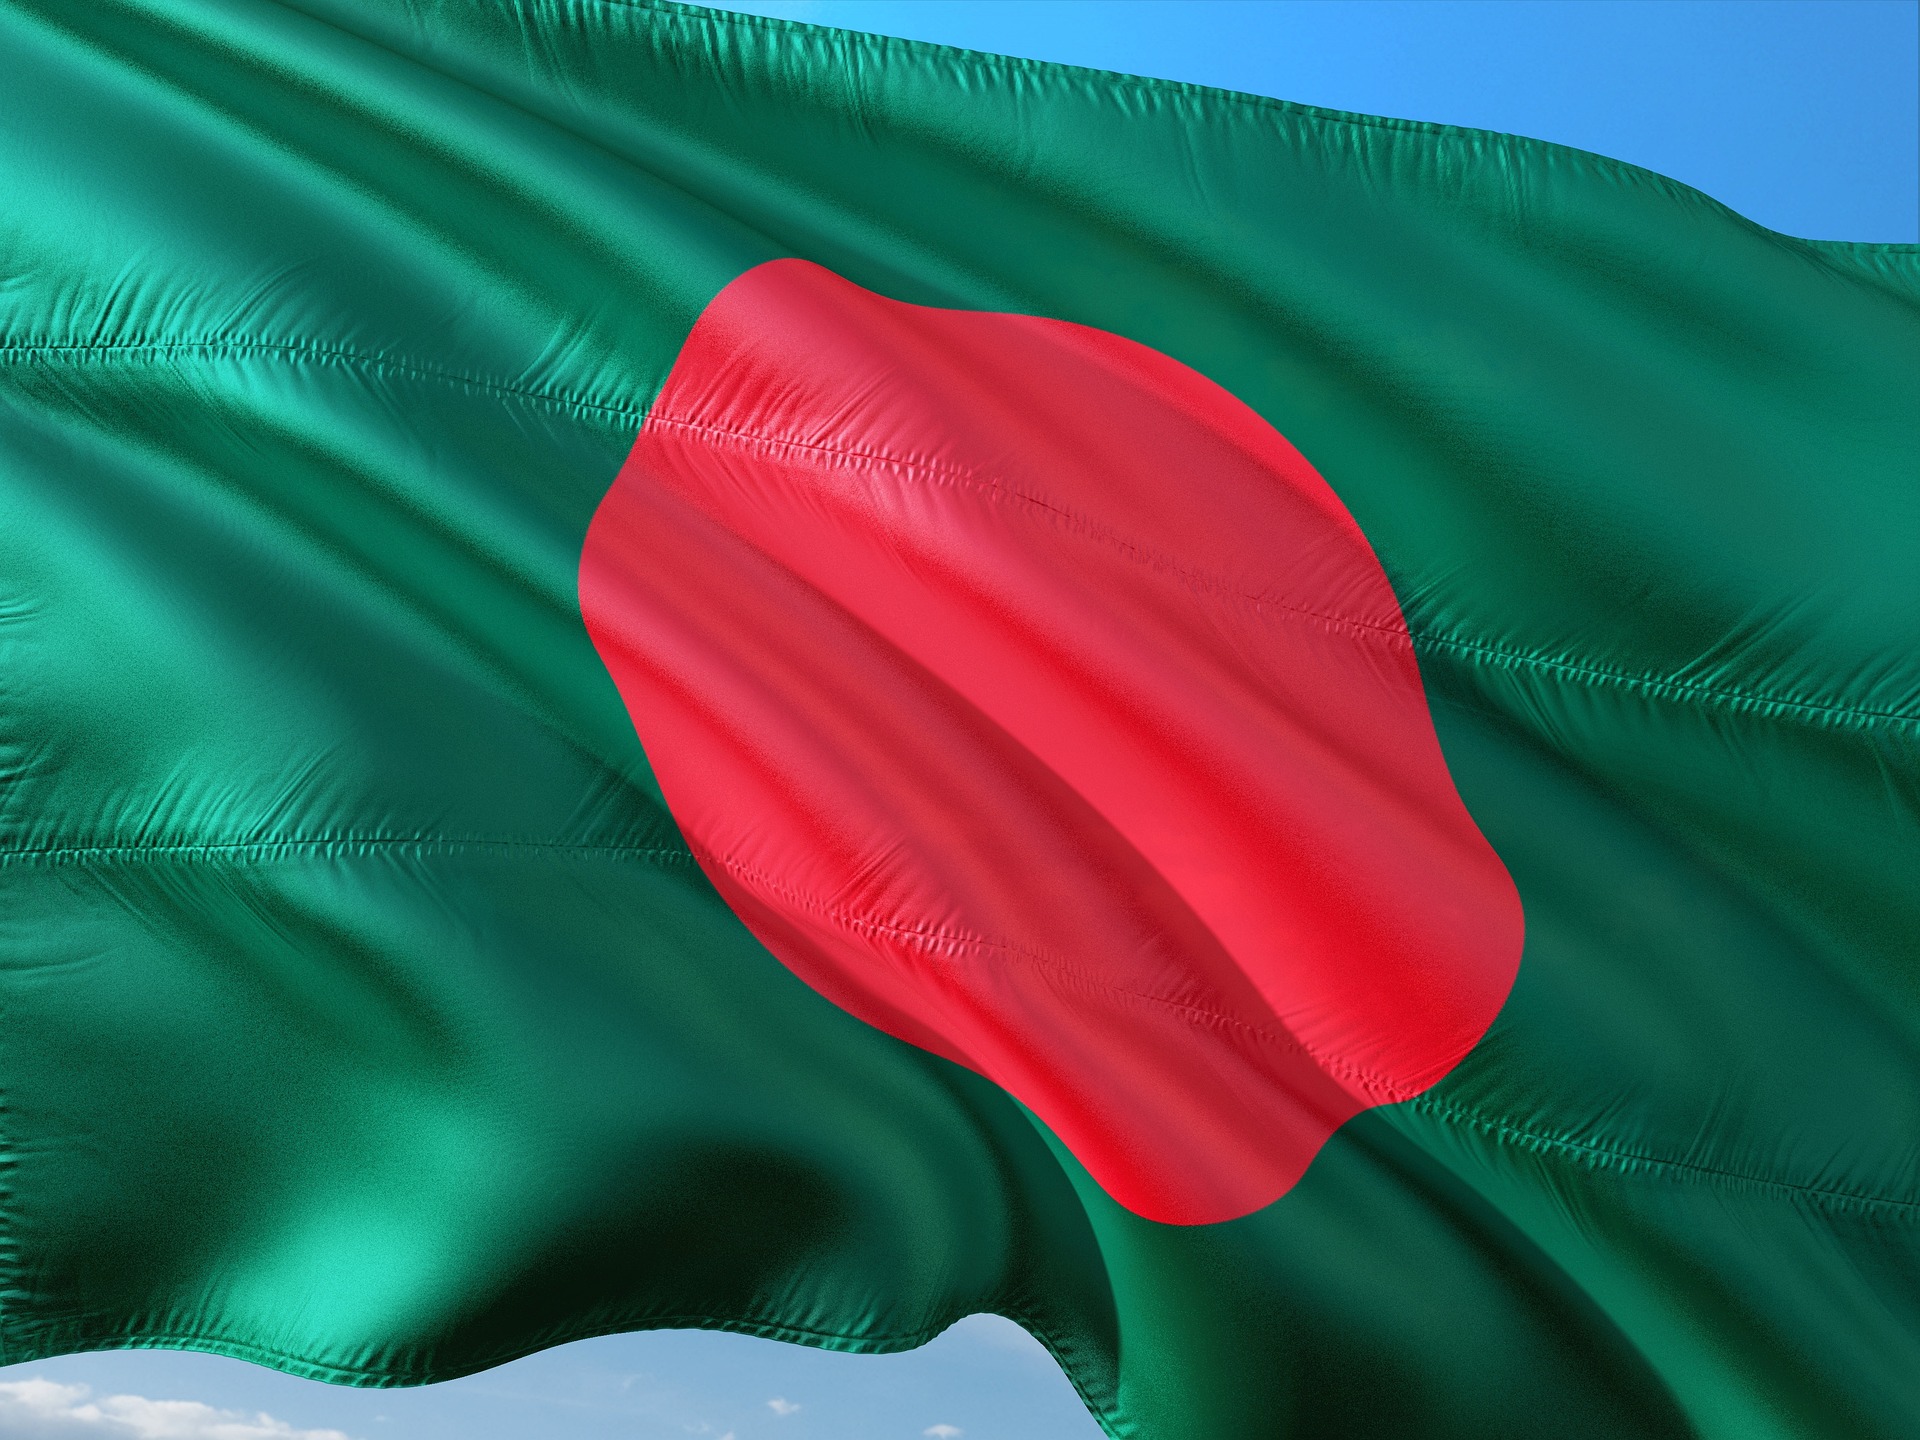 Bangladesh assures to purchase Russian oil if offered at reasonable price